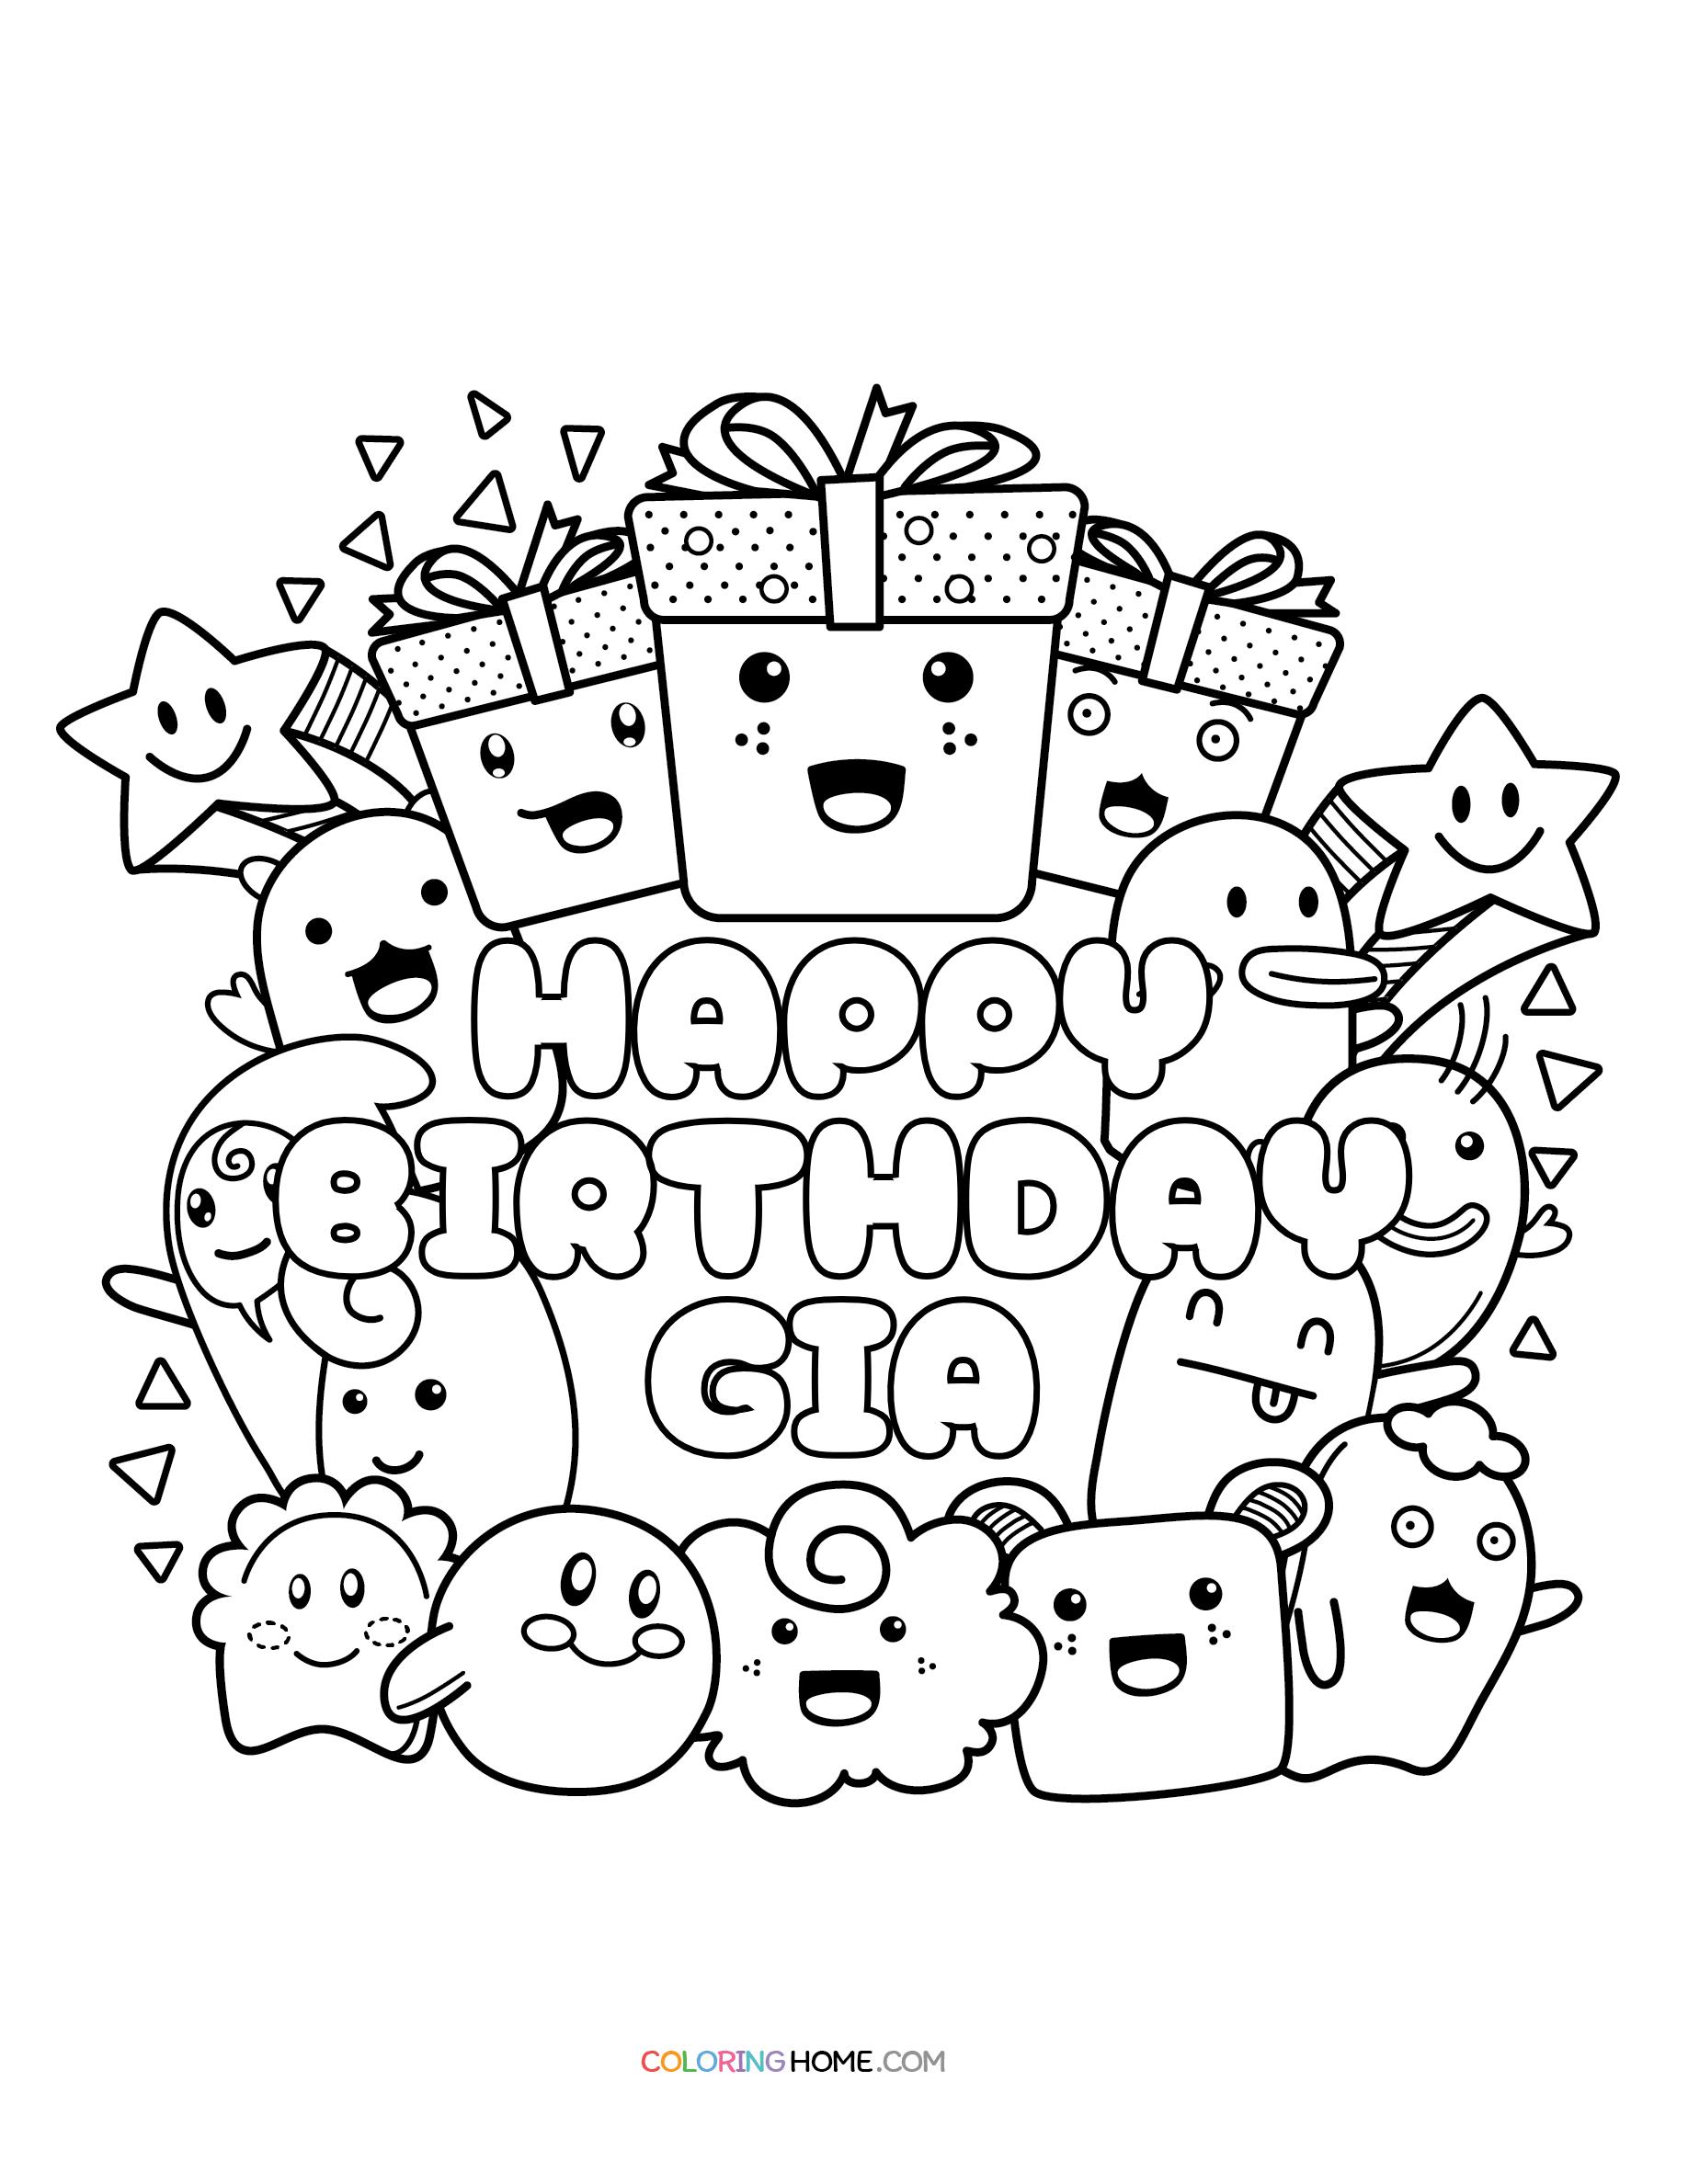 Happy Birthday Gia coloring page